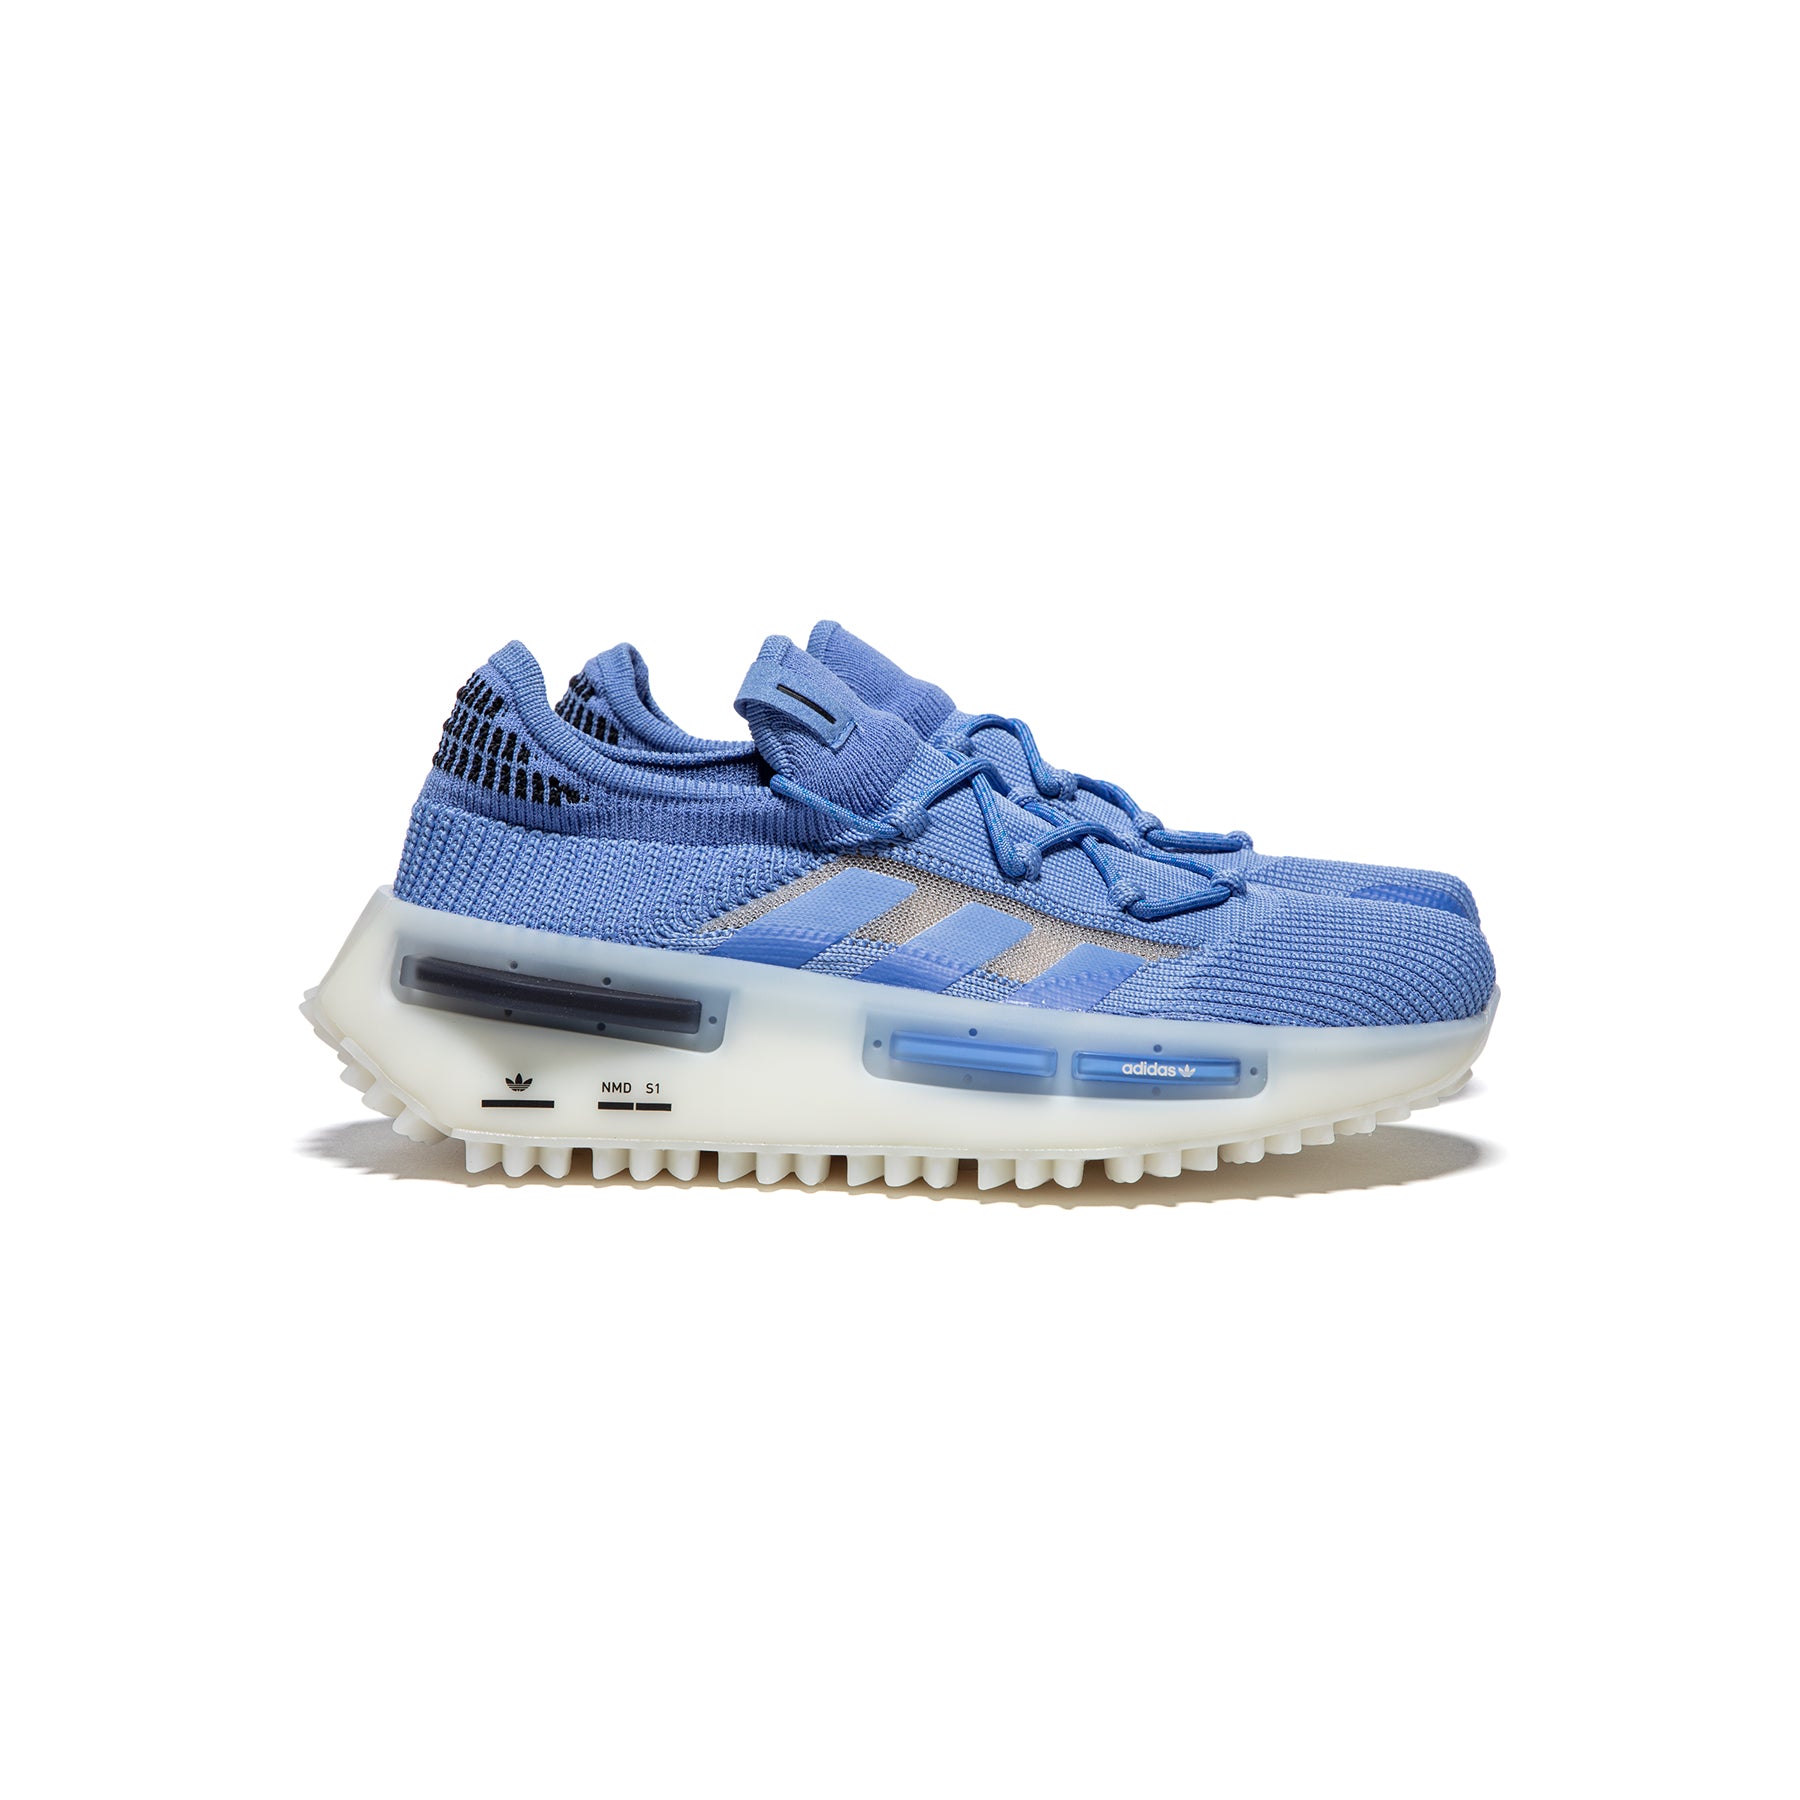 Settlers voldtage hvidløg adidas Womens NMD S1 (Blue Fusion/Off White/Cloud White) – Concepts